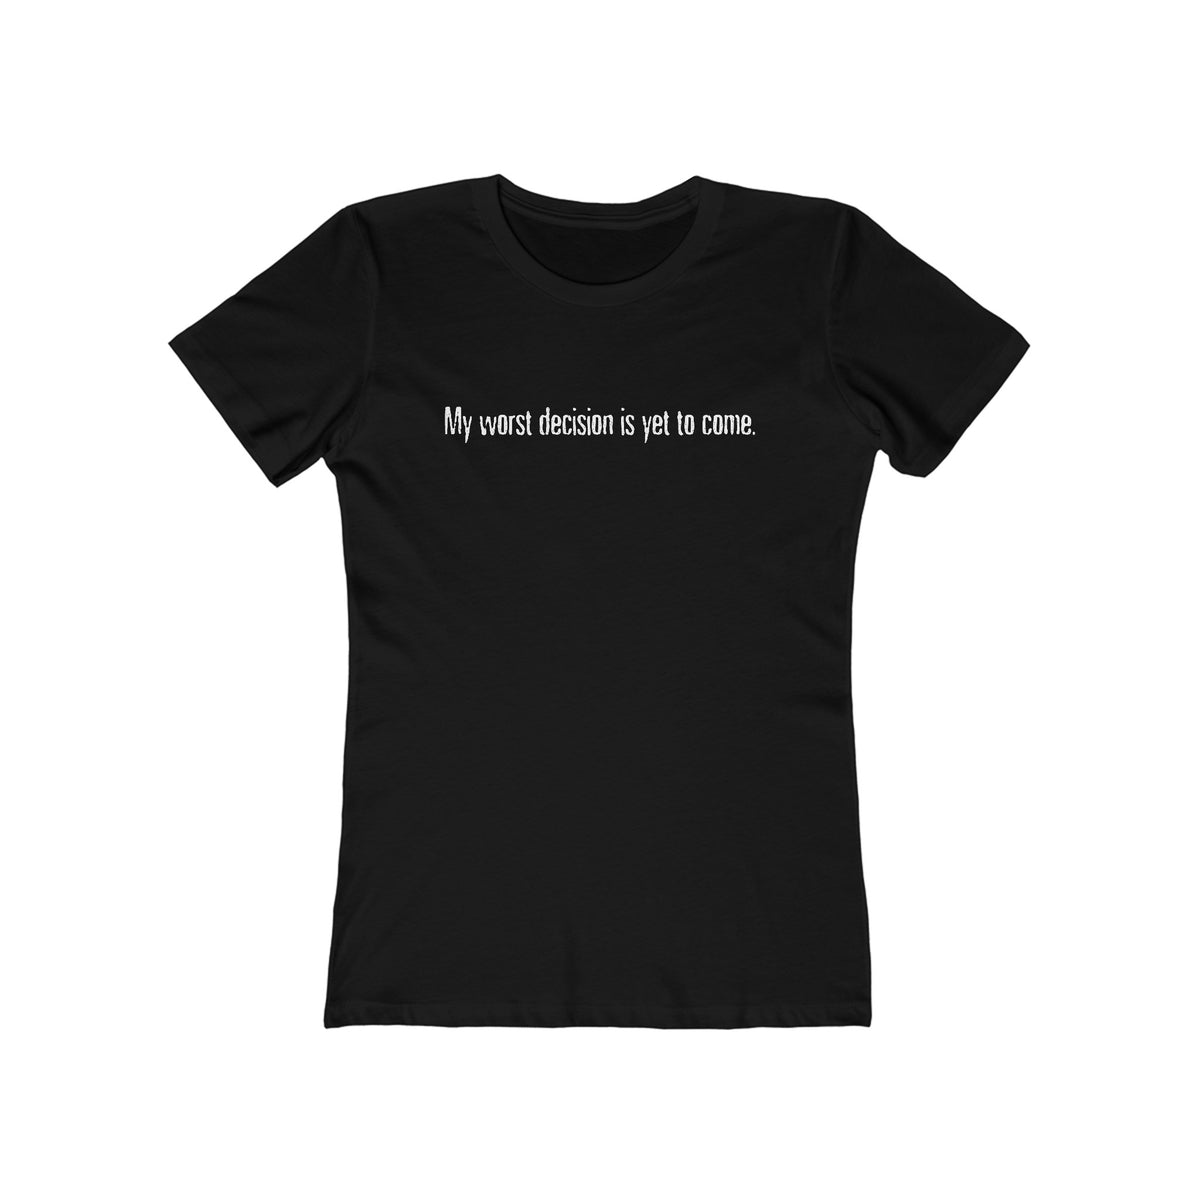 My Worst Decision Is Yet To Come. - Women’s T-Shirt